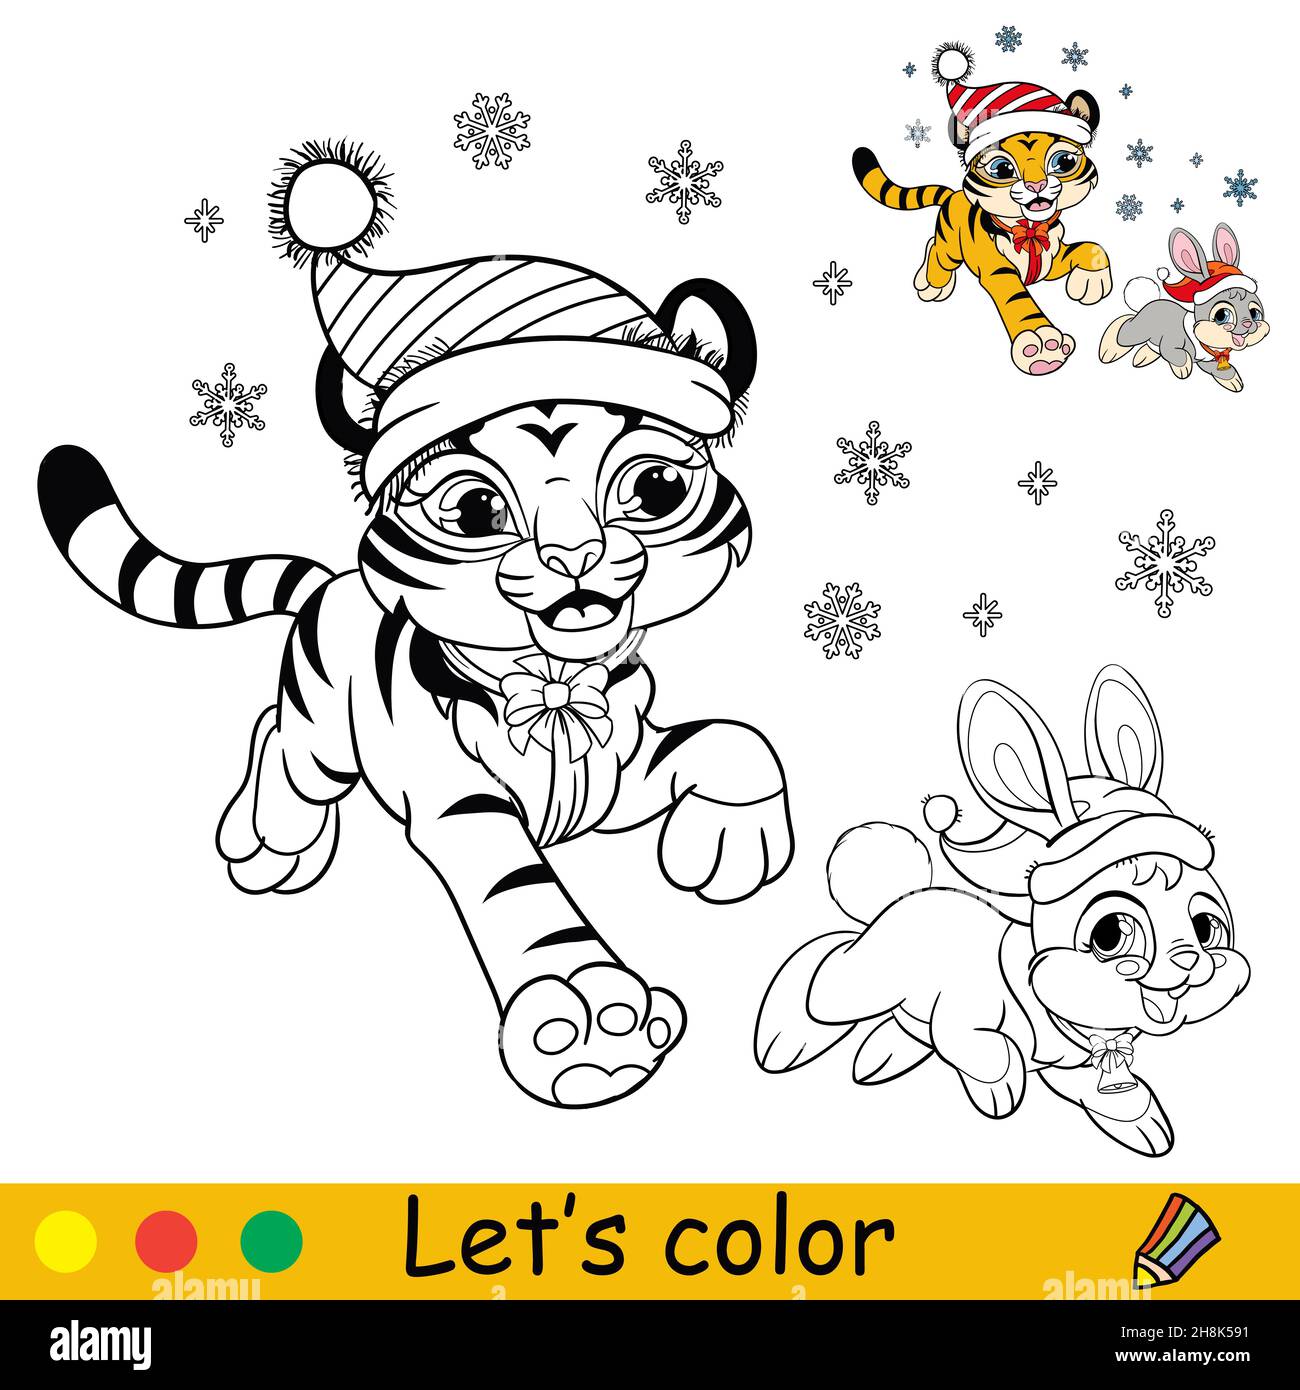 Coloring page with cute Christmas tiger cub runs with rabbit. Cartoon character. Coloring book with colored exemple. Outline vector illustration. For Stock Vector